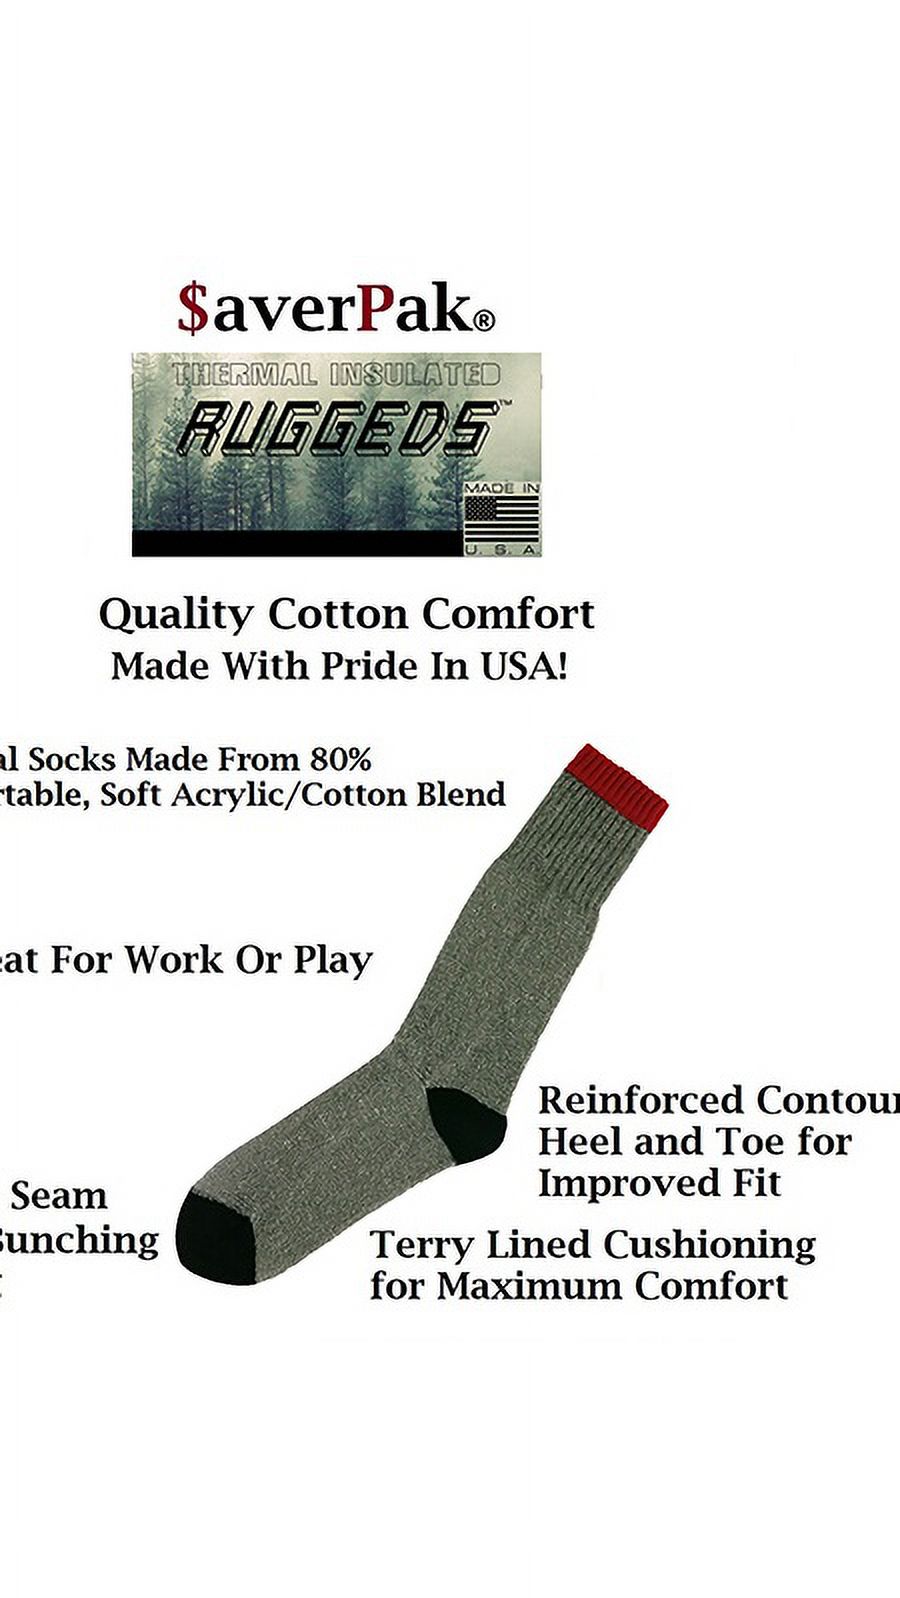 $averPak 2 Pack - Includes 2 Pair Ruggeds Cotton Blend Thermal Socks (2 Pair Per Band Size 9-11) - image 2 of 3